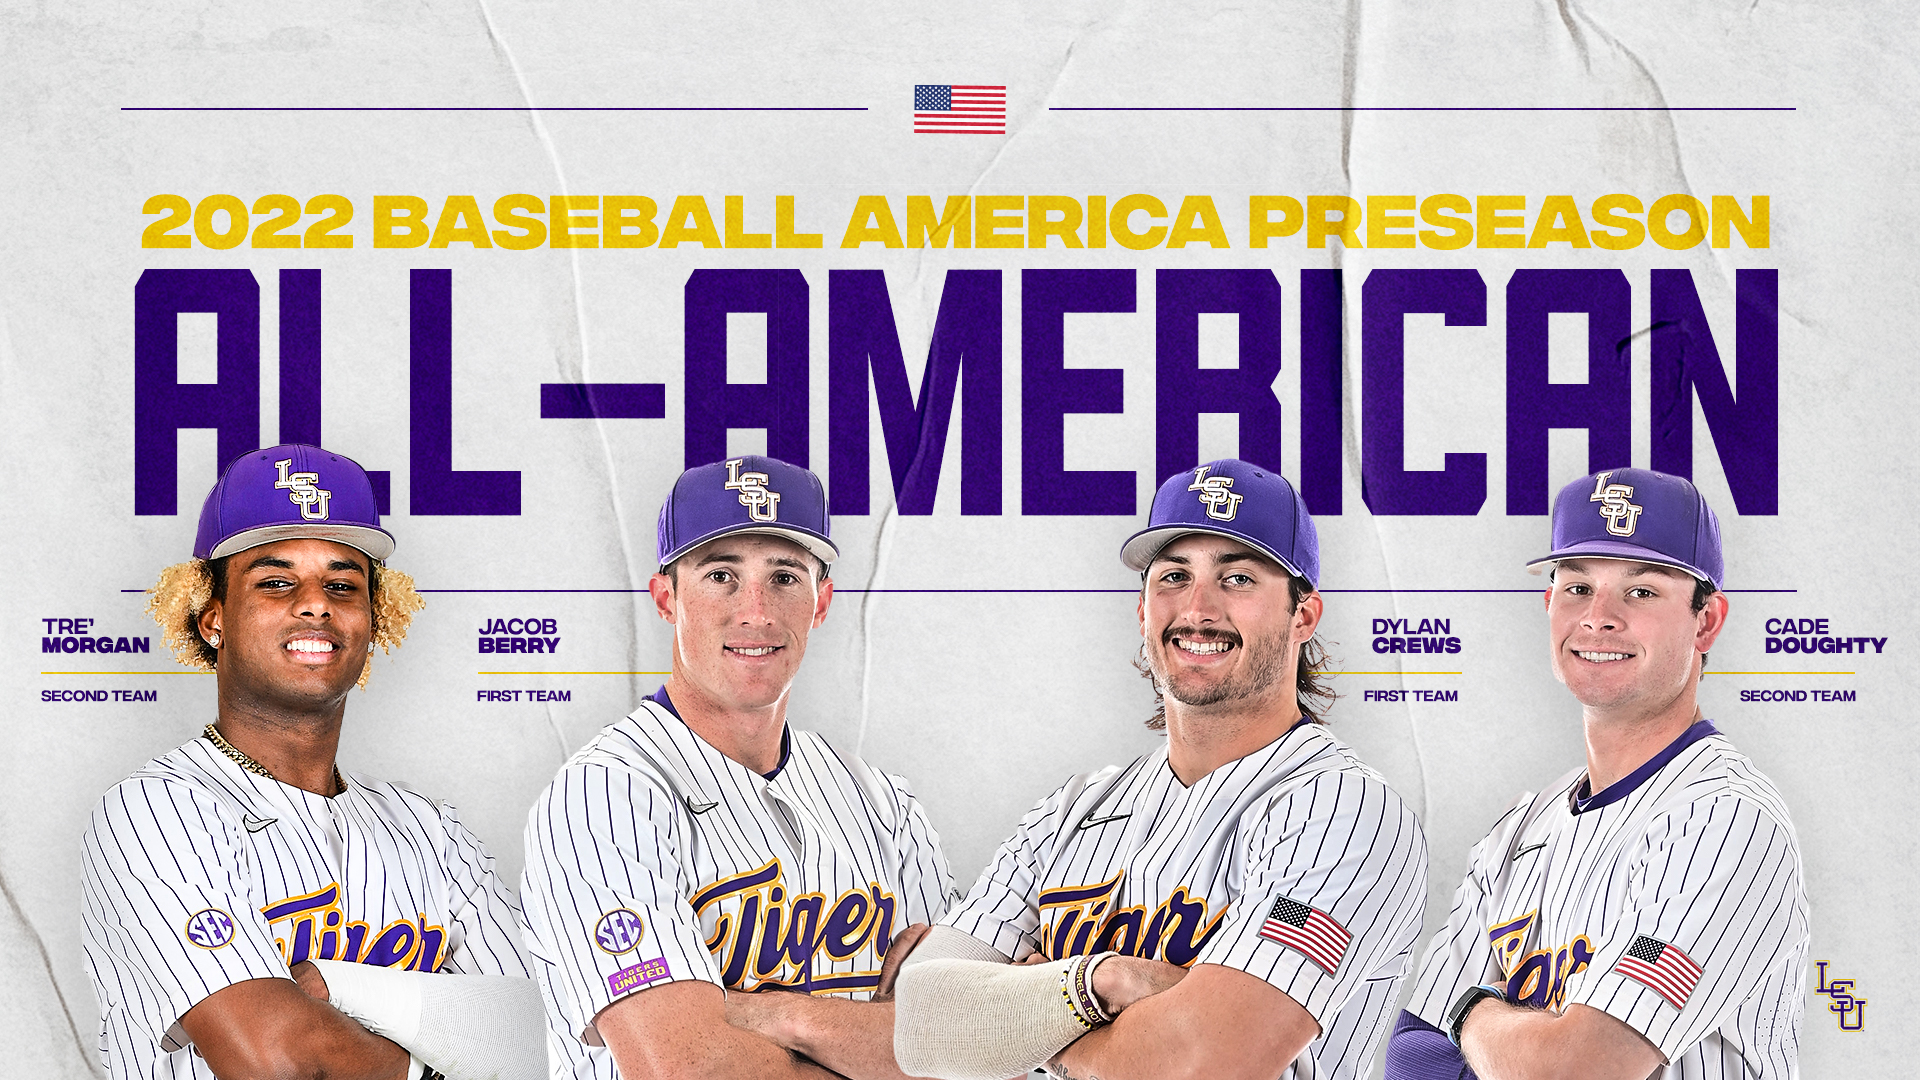 LSU baseball leads nation with four players named to Baseball America’s